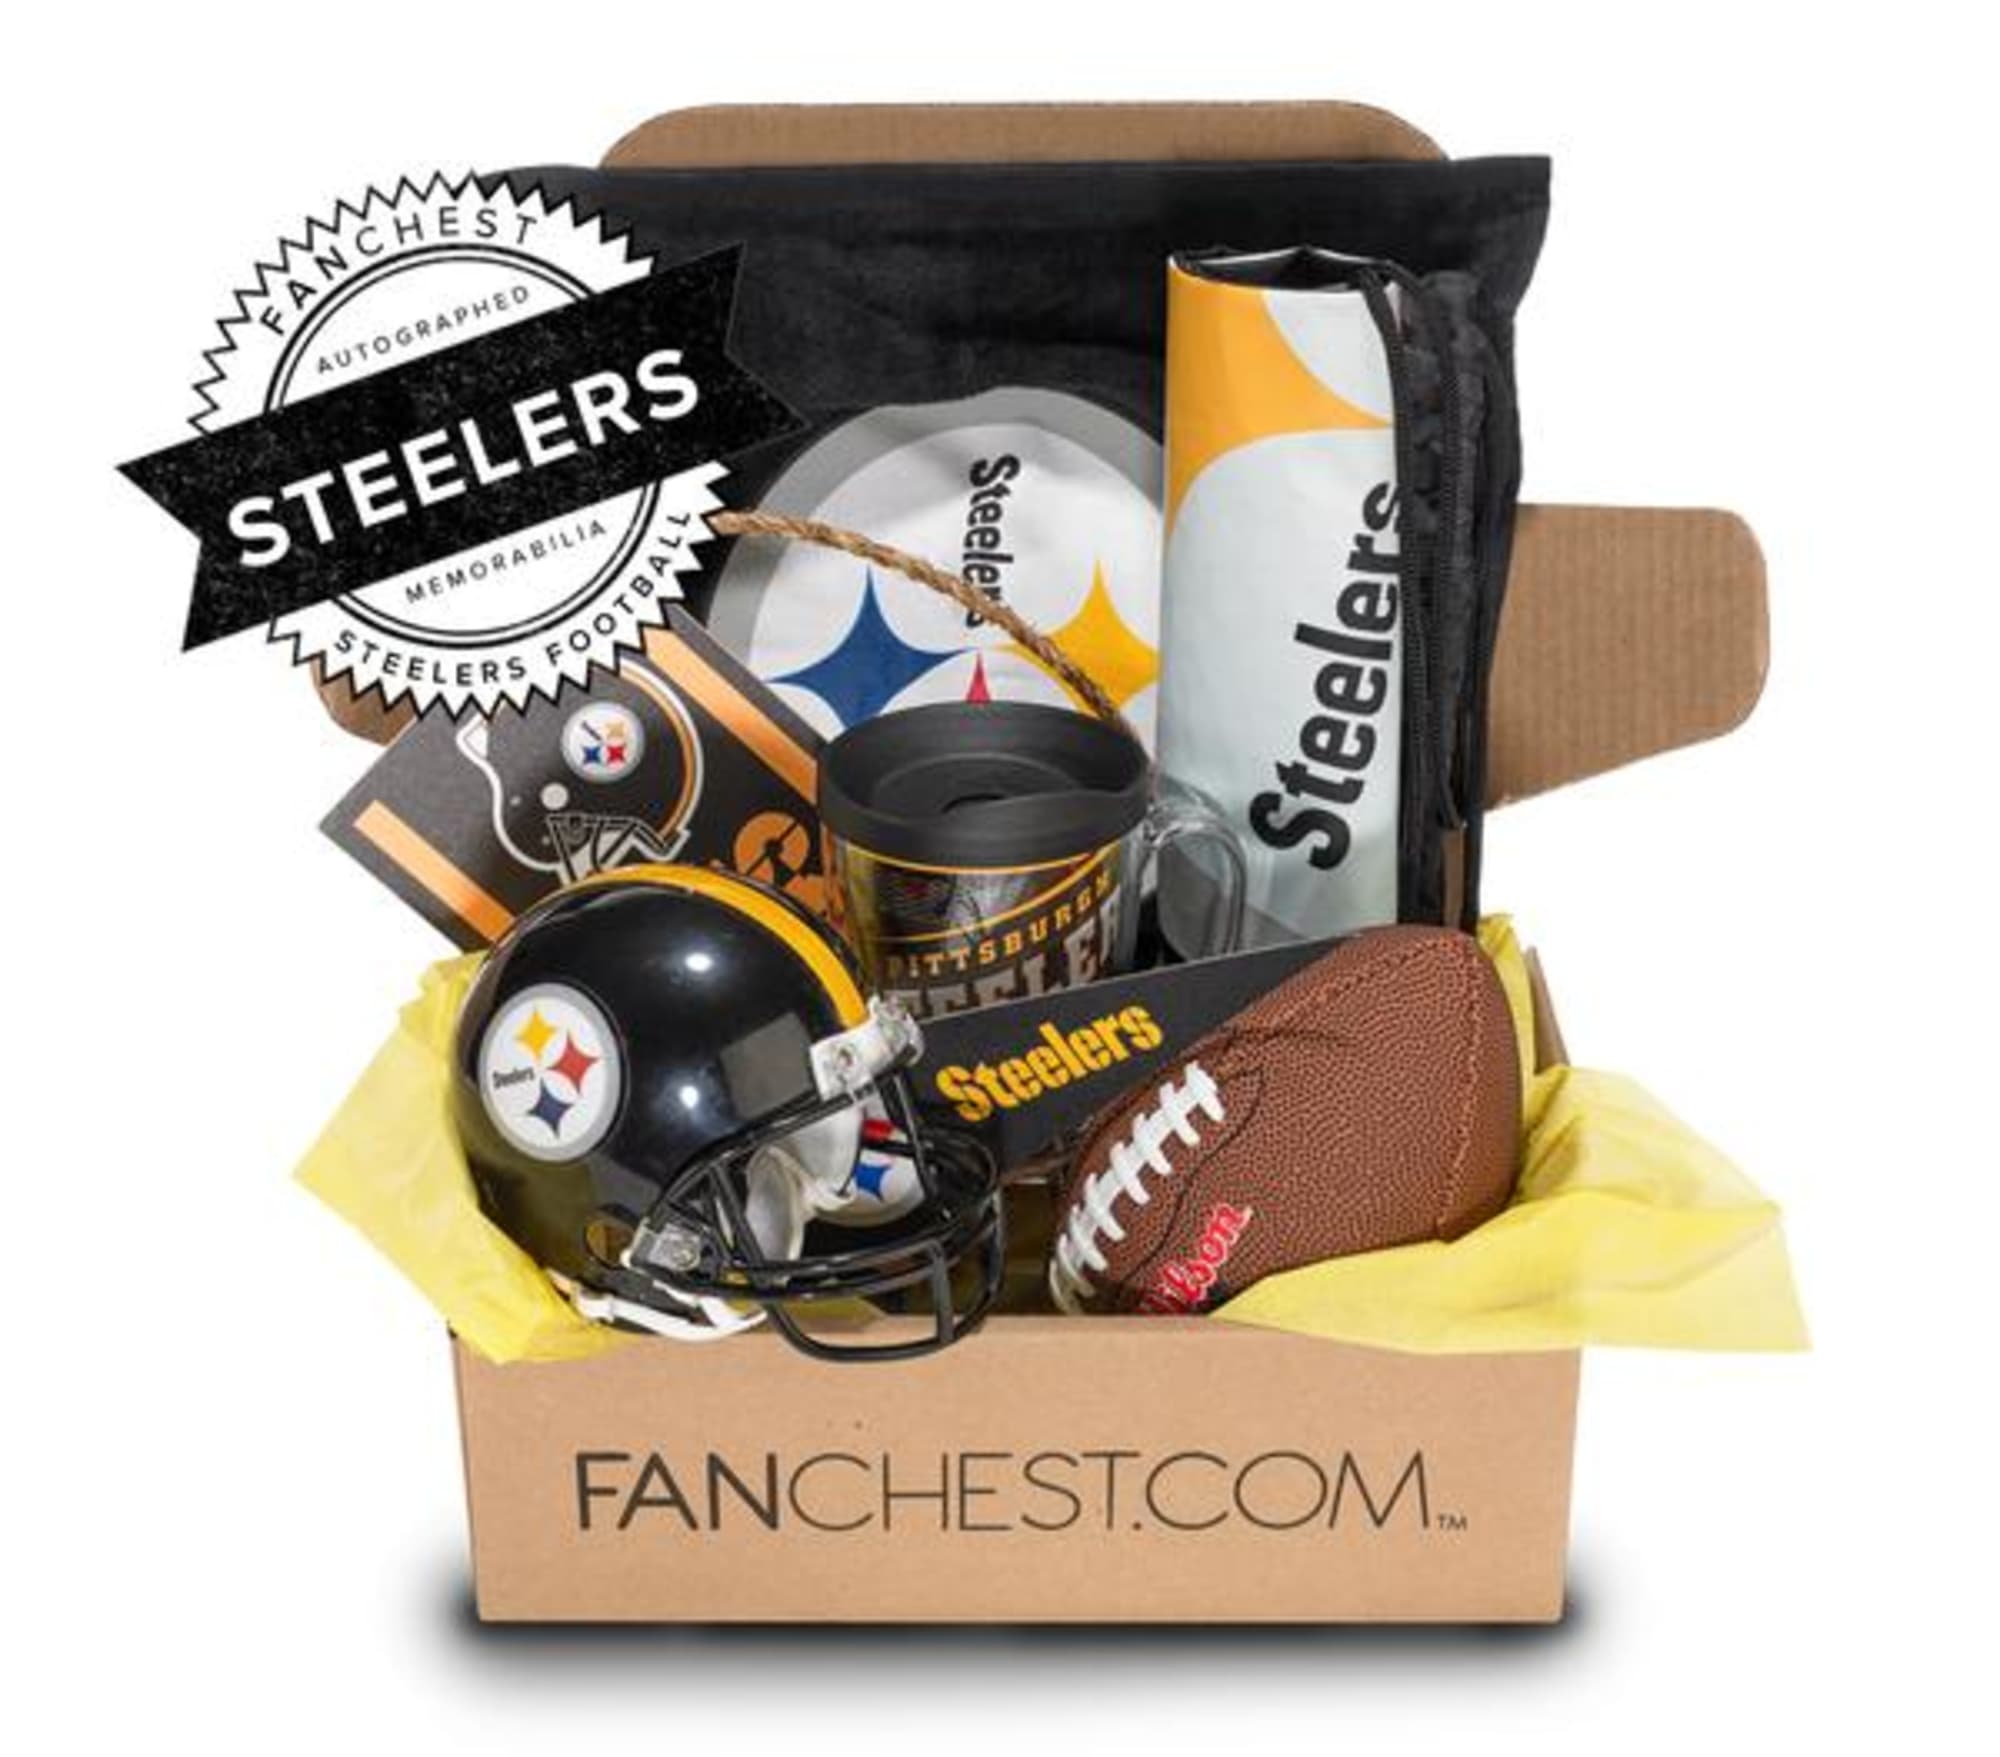 A Pittsburgh Steelers Fanchest is the perfect holiday gift